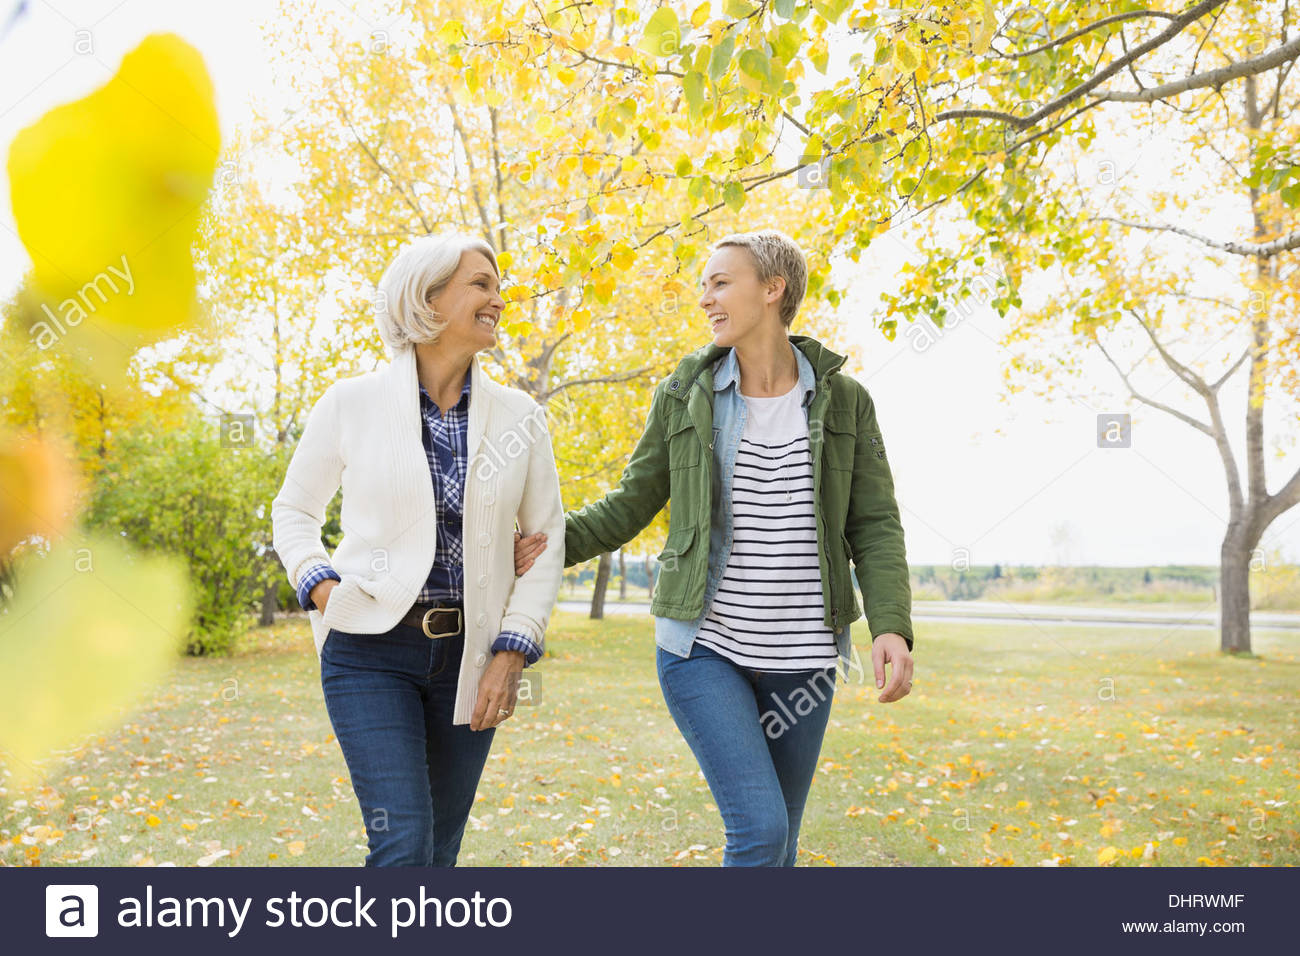 Smiling mother and daughter walking in park Banque D'Images